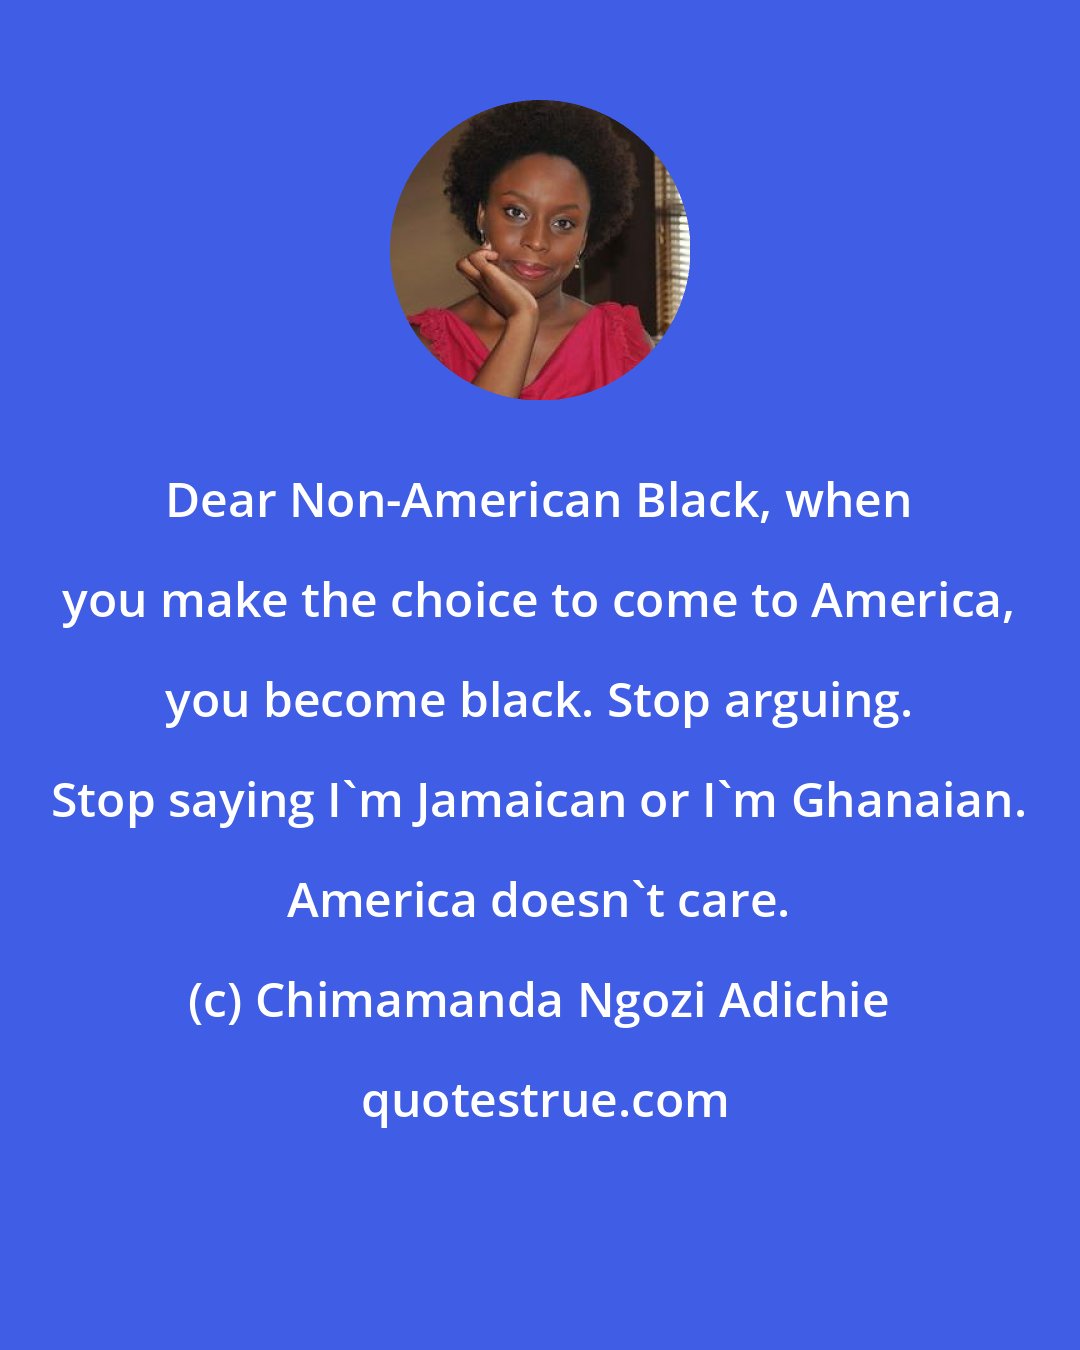 Chimamanda Ngozi Adichie: Dear Non-American Black, when you make the choice to come to America, you become black. Stop arguing. Stop saying I'm Jamaican or I'm Ghanaian. America doesn't care.